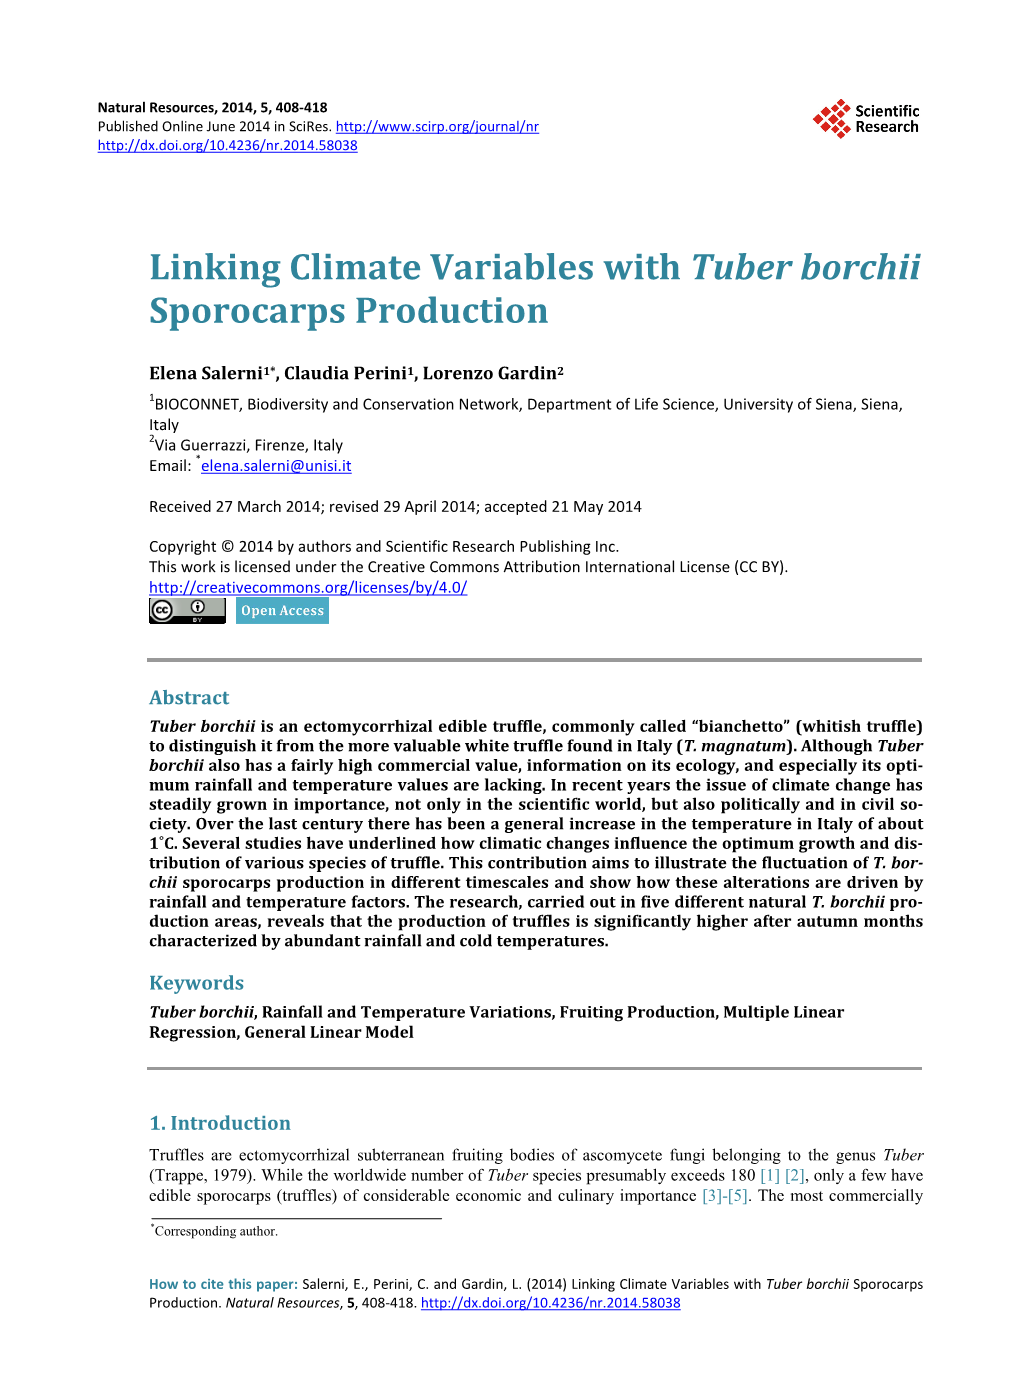 Linking Climate Variables with Tuber Borchii Sporocarps Production